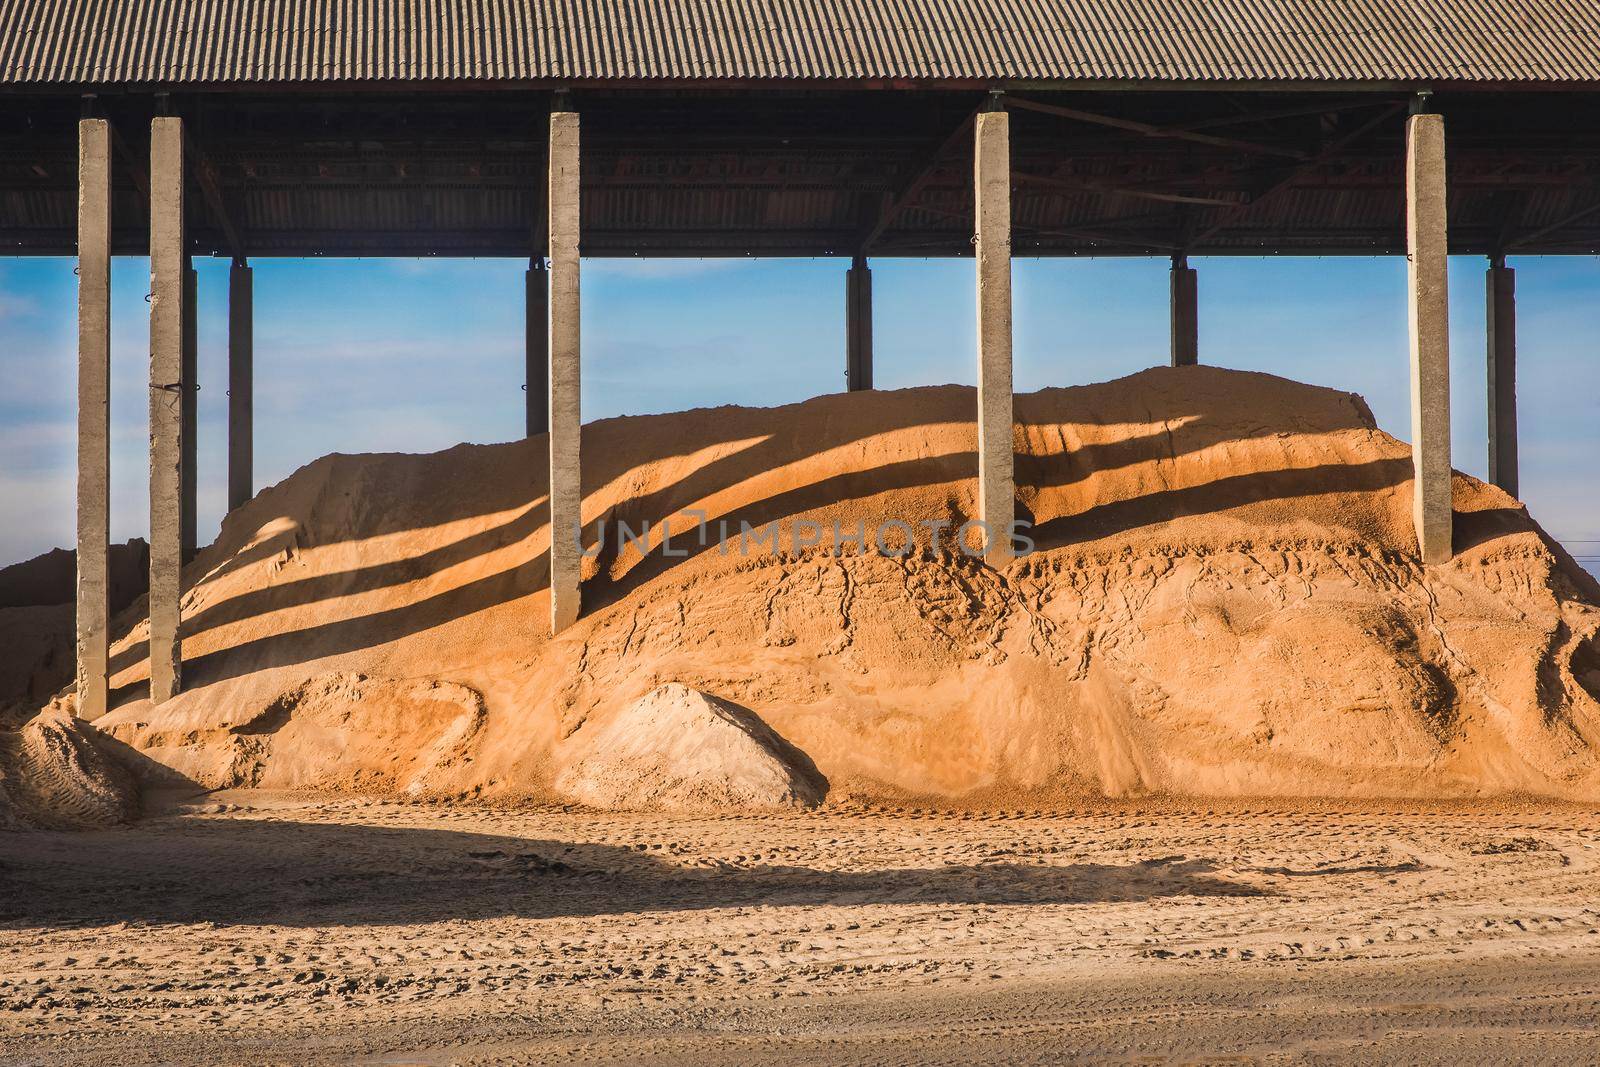 A large pile of sand under a canopy of slate storage on industrial warehouse at a construction site.